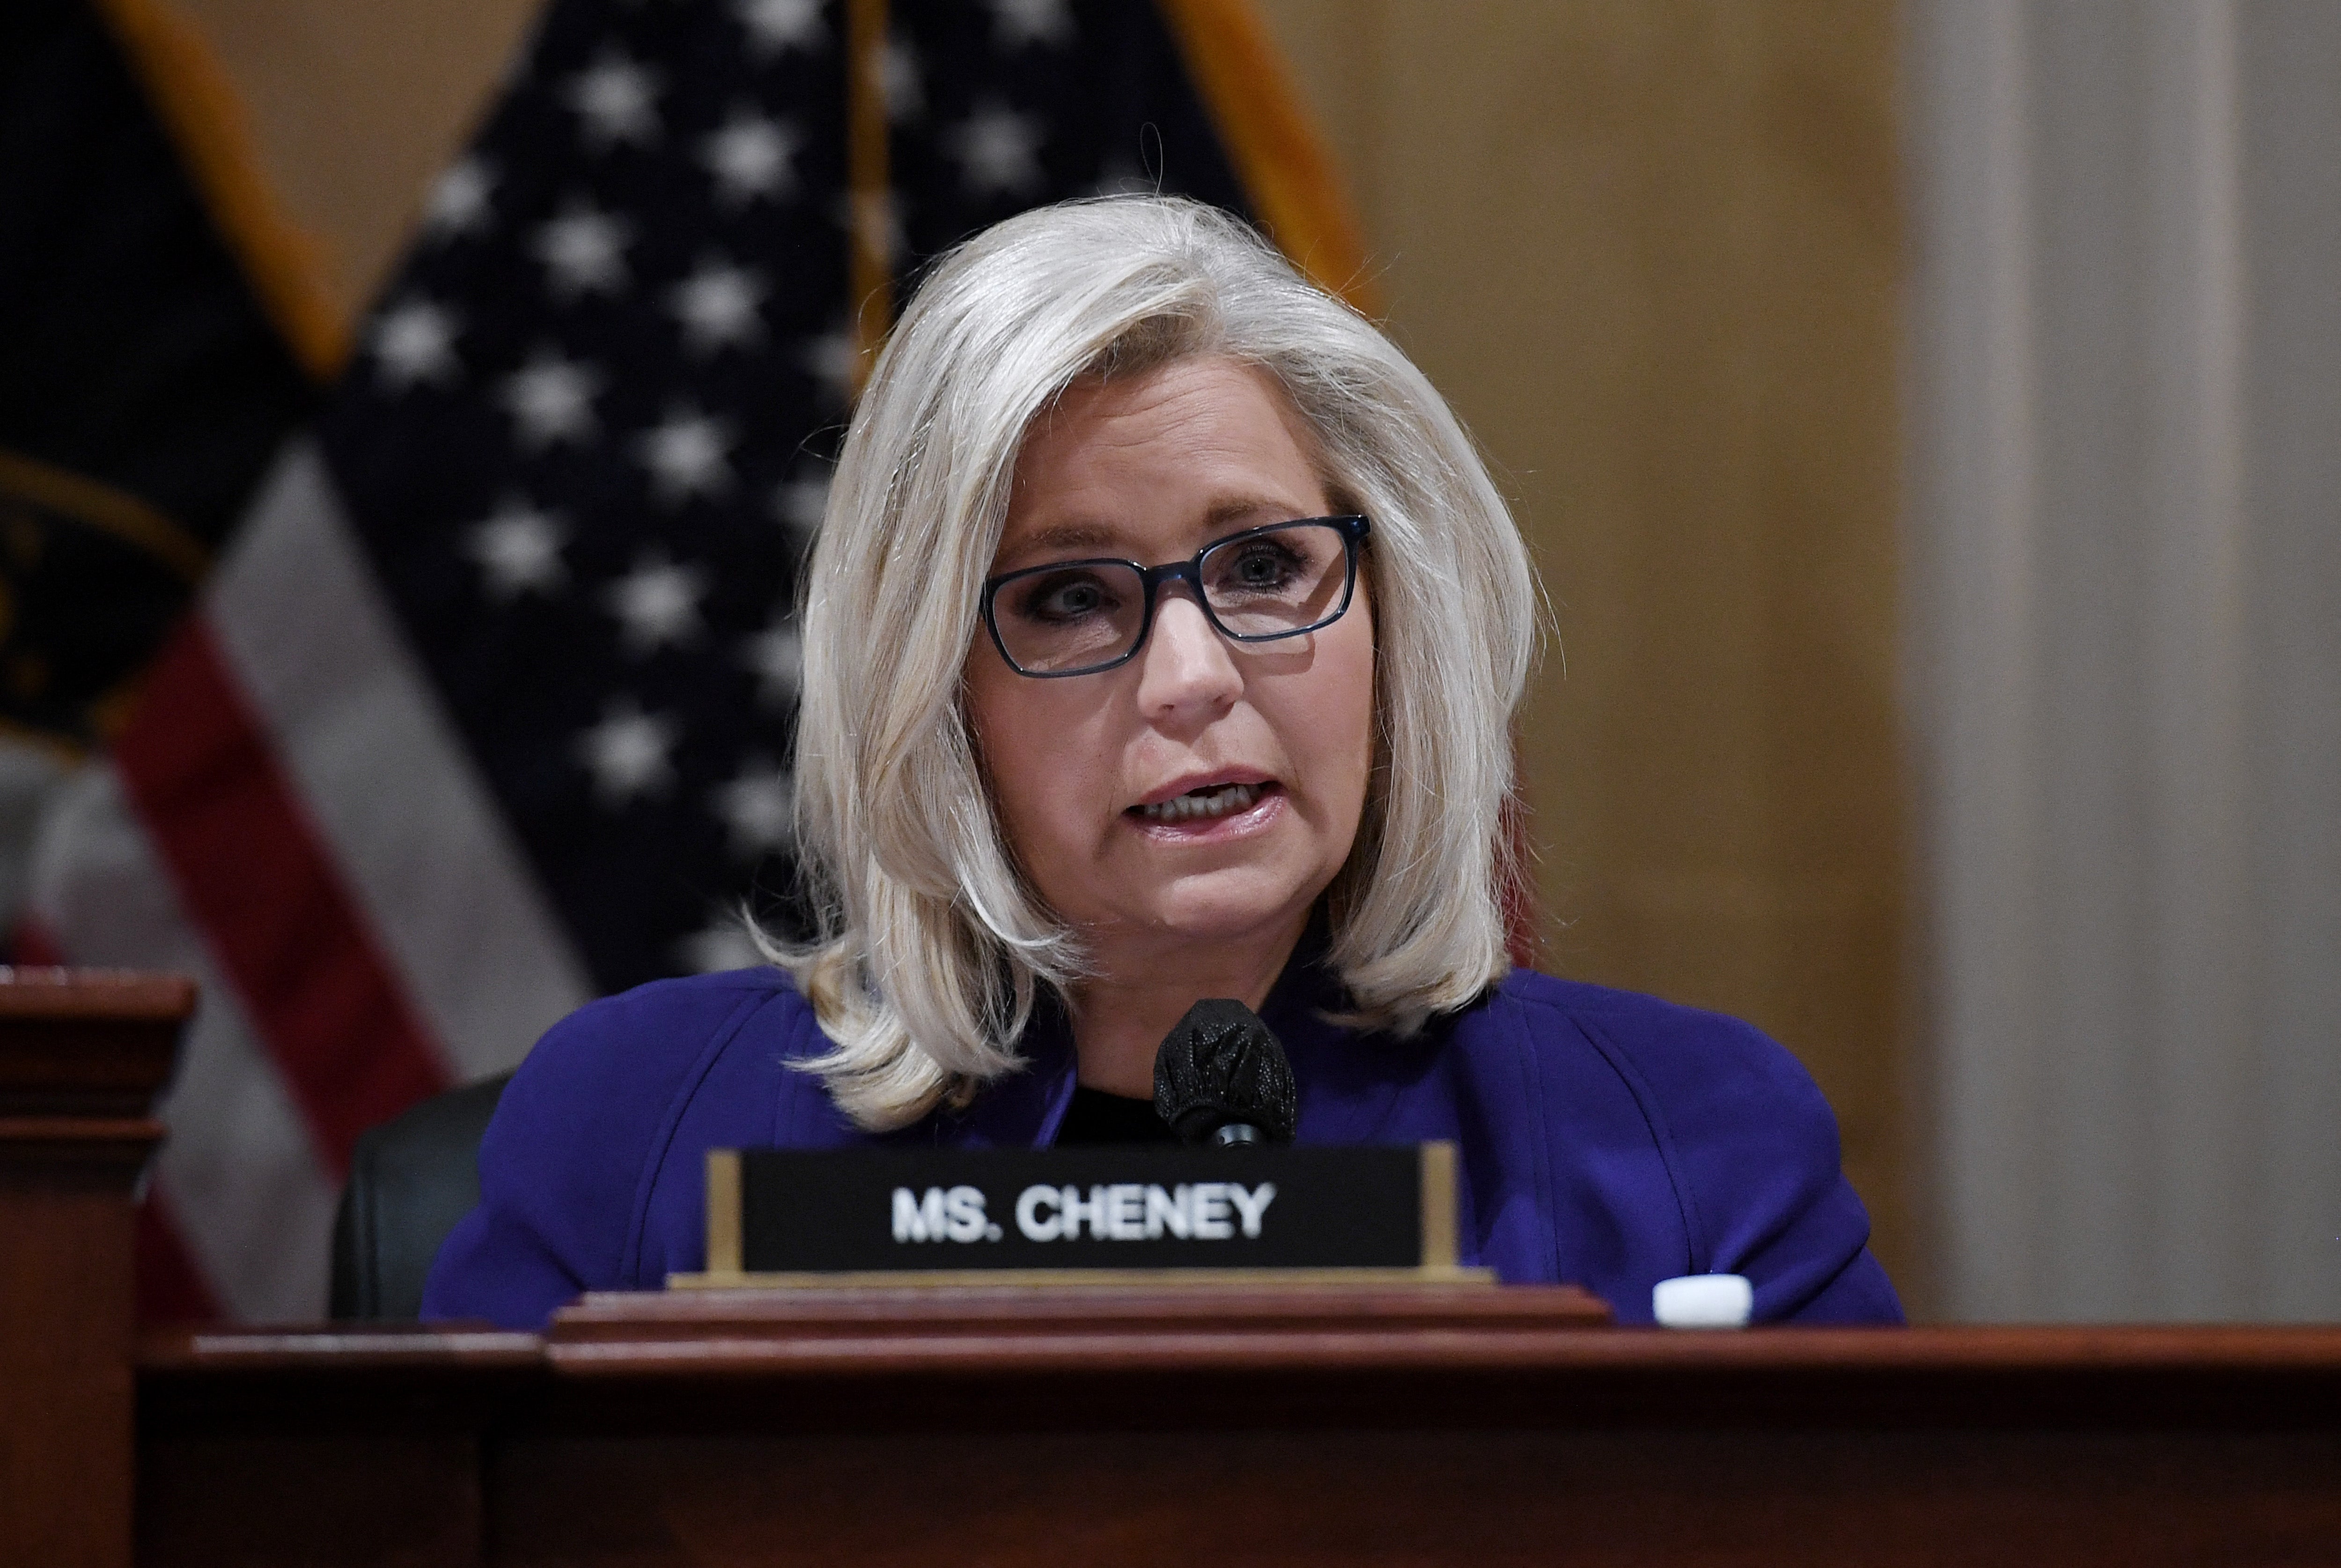 File photo: Rep Liz Cheney was one of 10 Republicans who wanted to impeach Donald Trump for ‘incitement of insurrection’ in the wake of the 6 January attack at the US Capitol